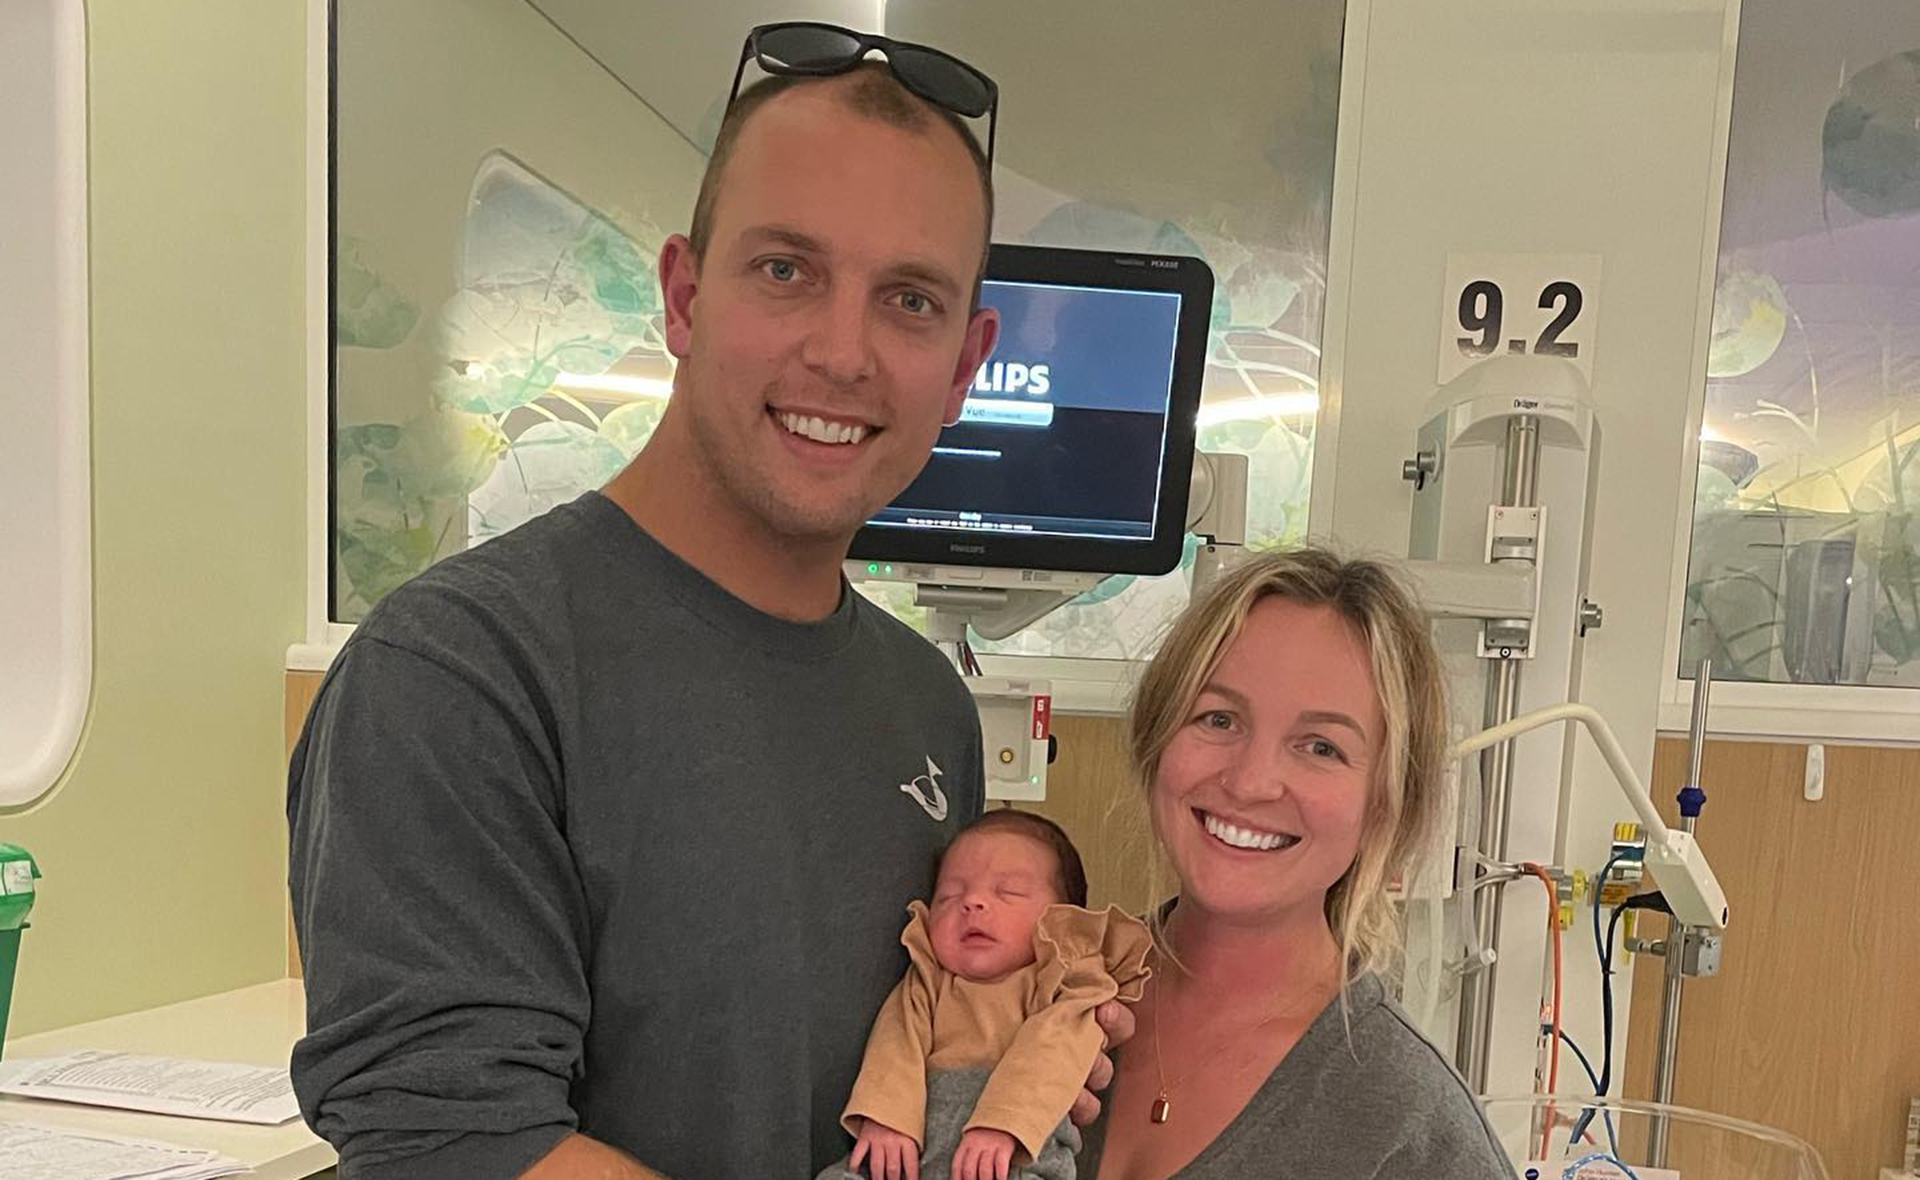 Former Bachelorette Becky Miles shares her newborn daughter’s biggest milestone to date: “So very excited”